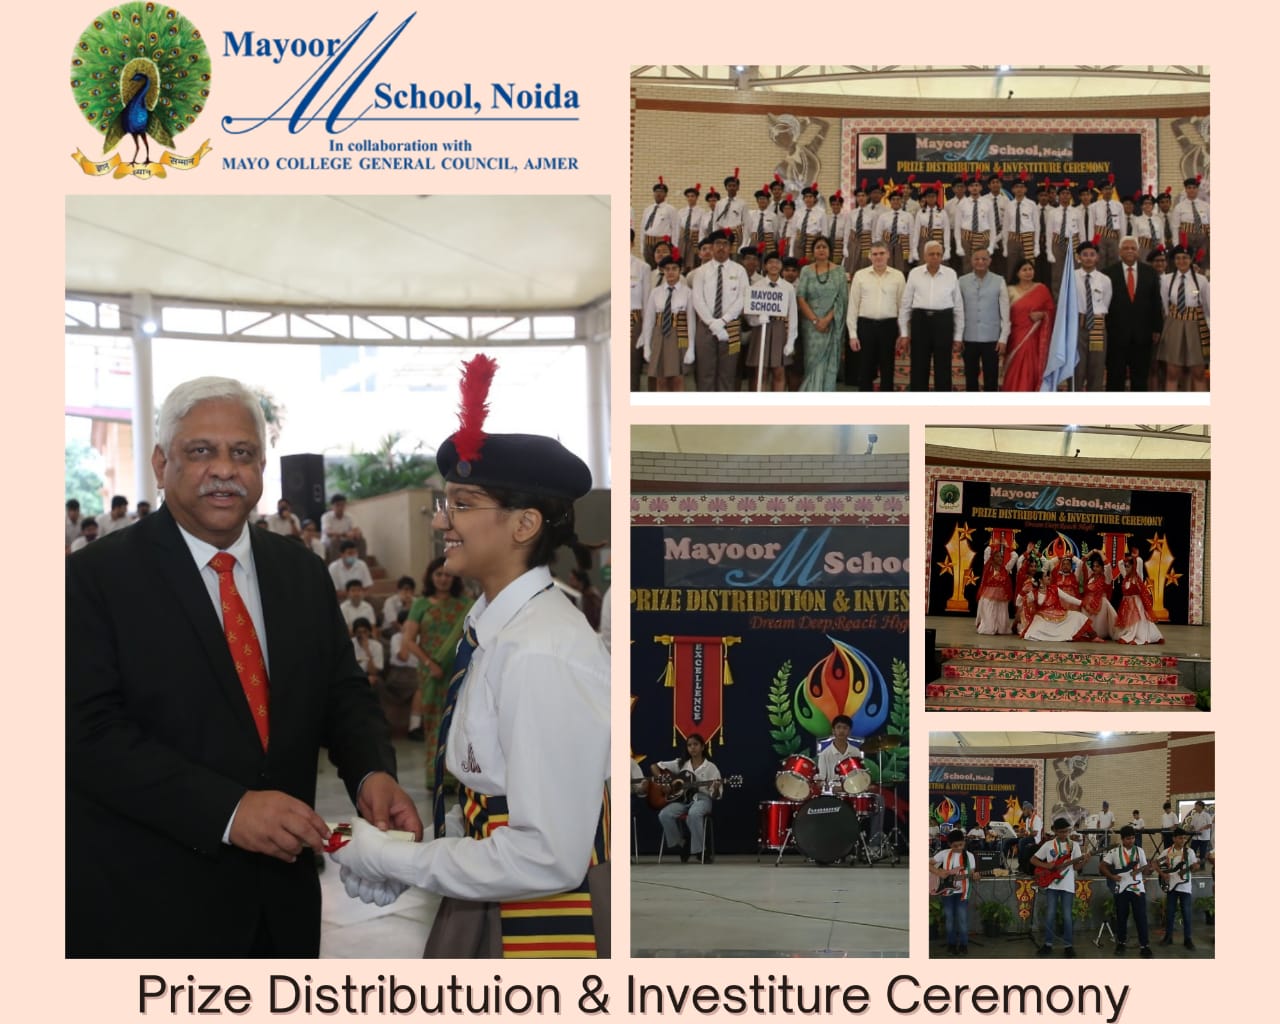 Investiture and Prize Distribution Ceremony at Mayoor